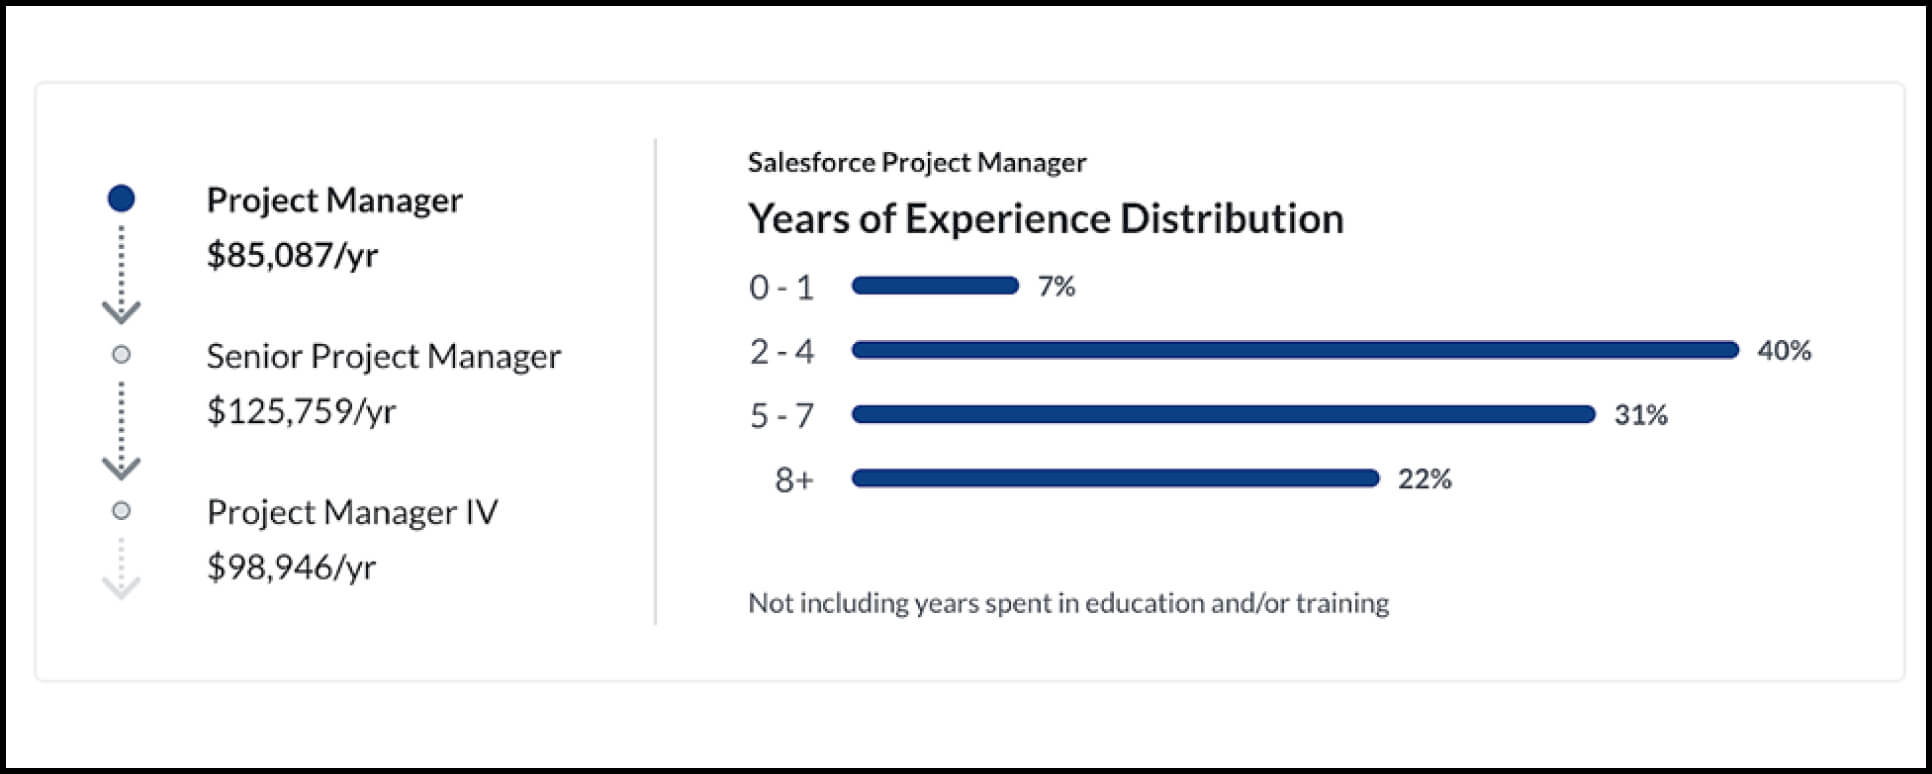 glassdoor website showing sallesforce project manager salaries at different levels